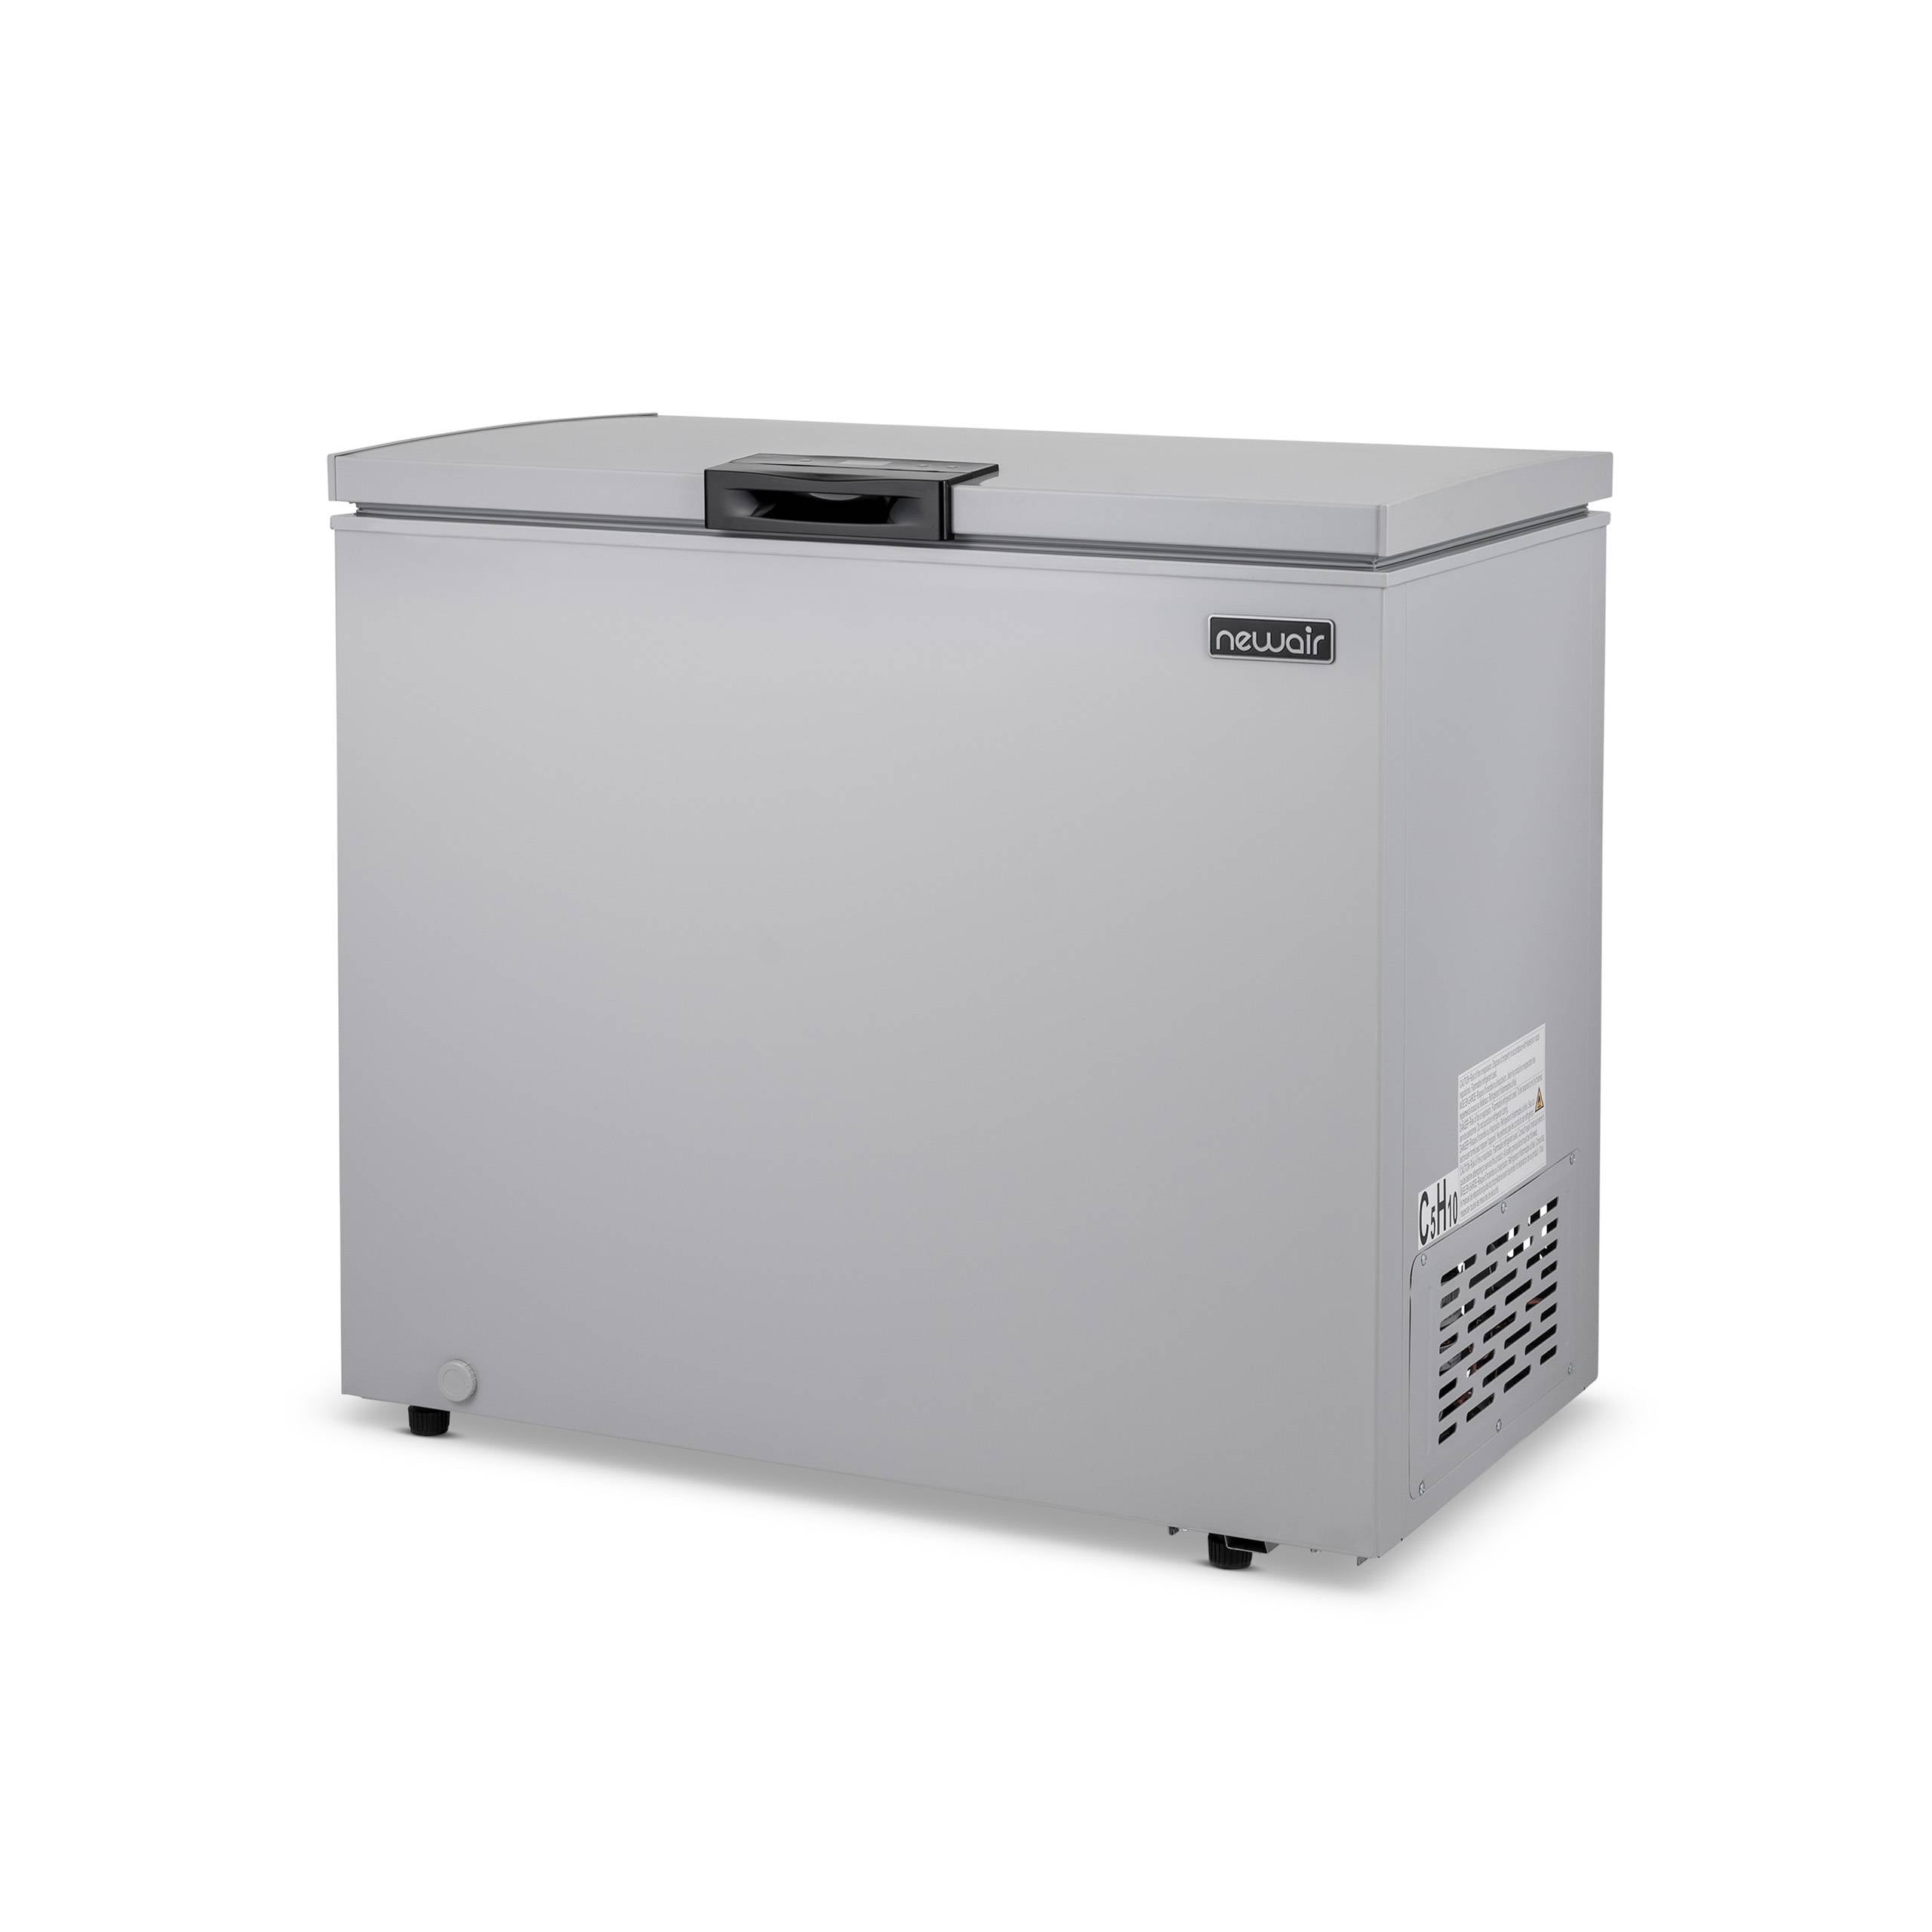 NewAir 7.0 Cu. Ft. Compact Chest Freezer in Cool Gray – Newair